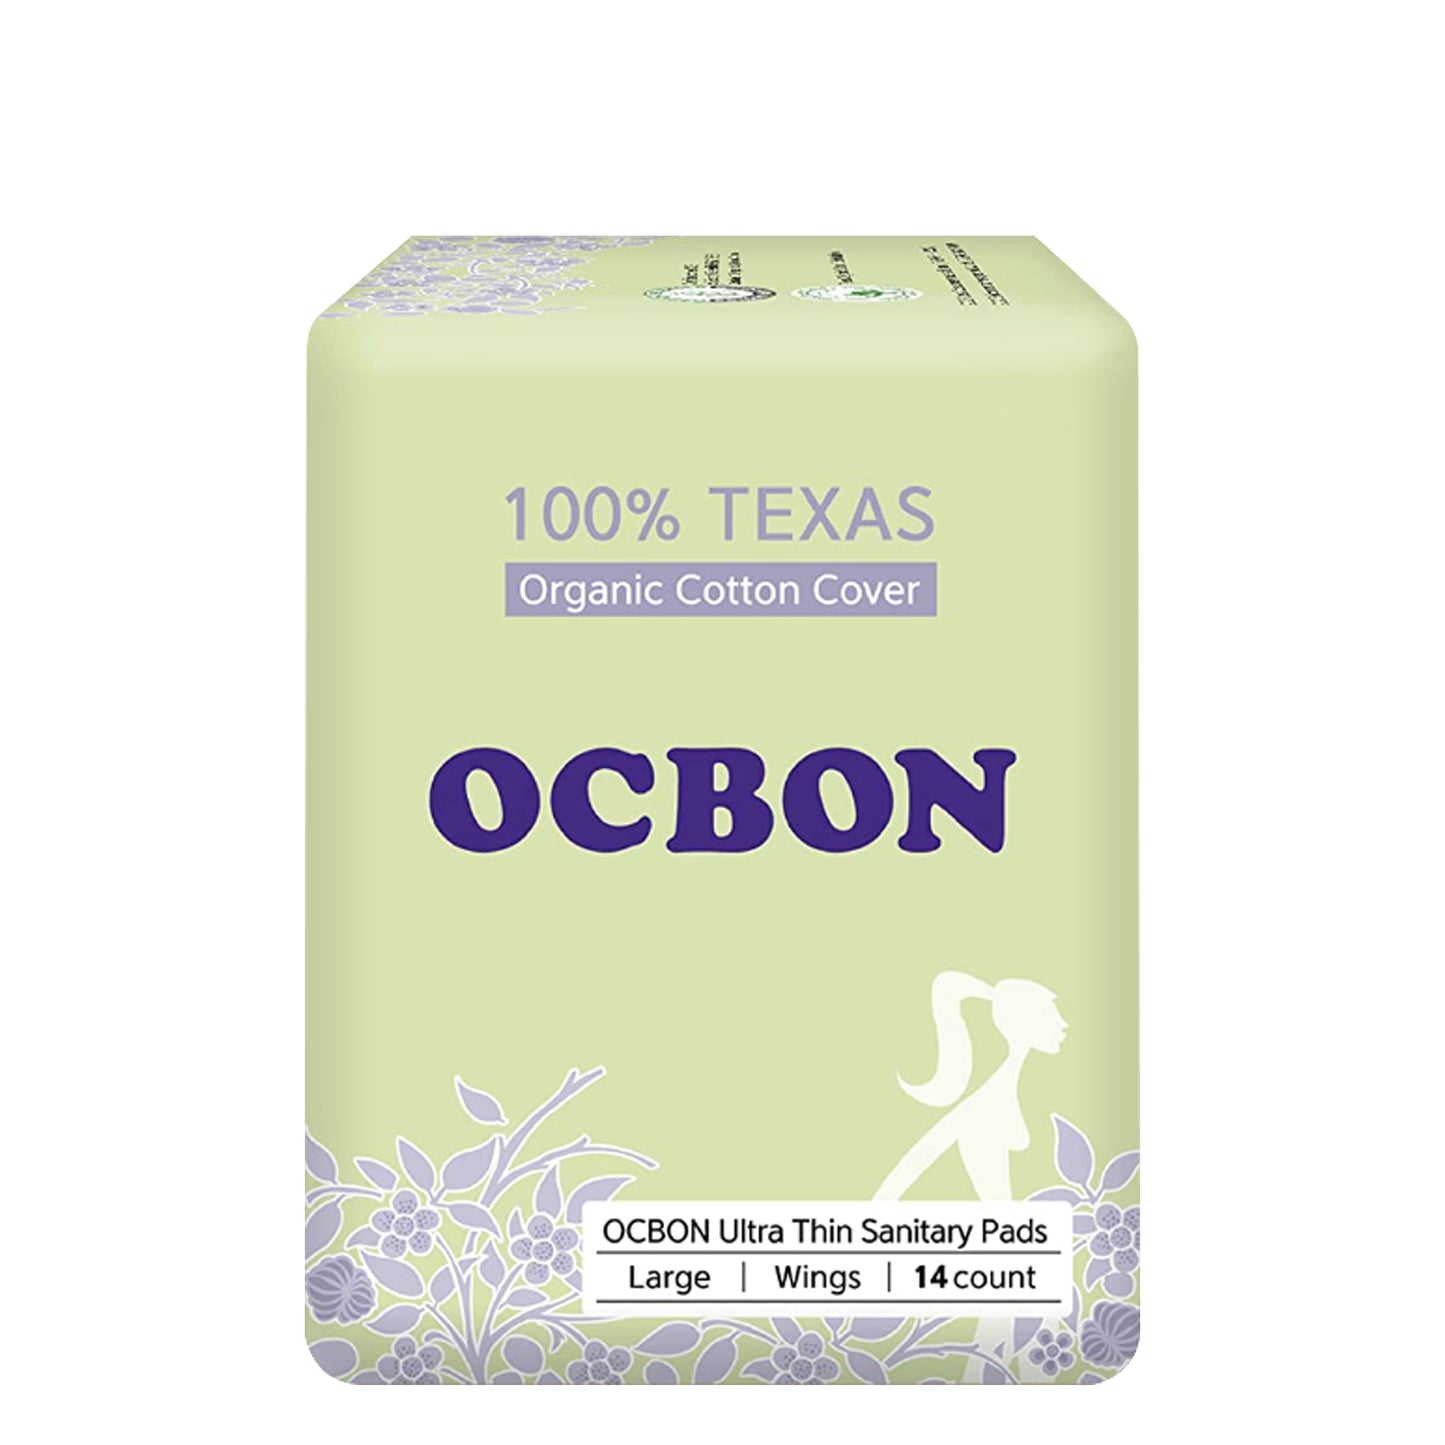 OCBON Ultra Thin Sanitary Pads 1-Pack  (Large, 28cm,14 Counts)